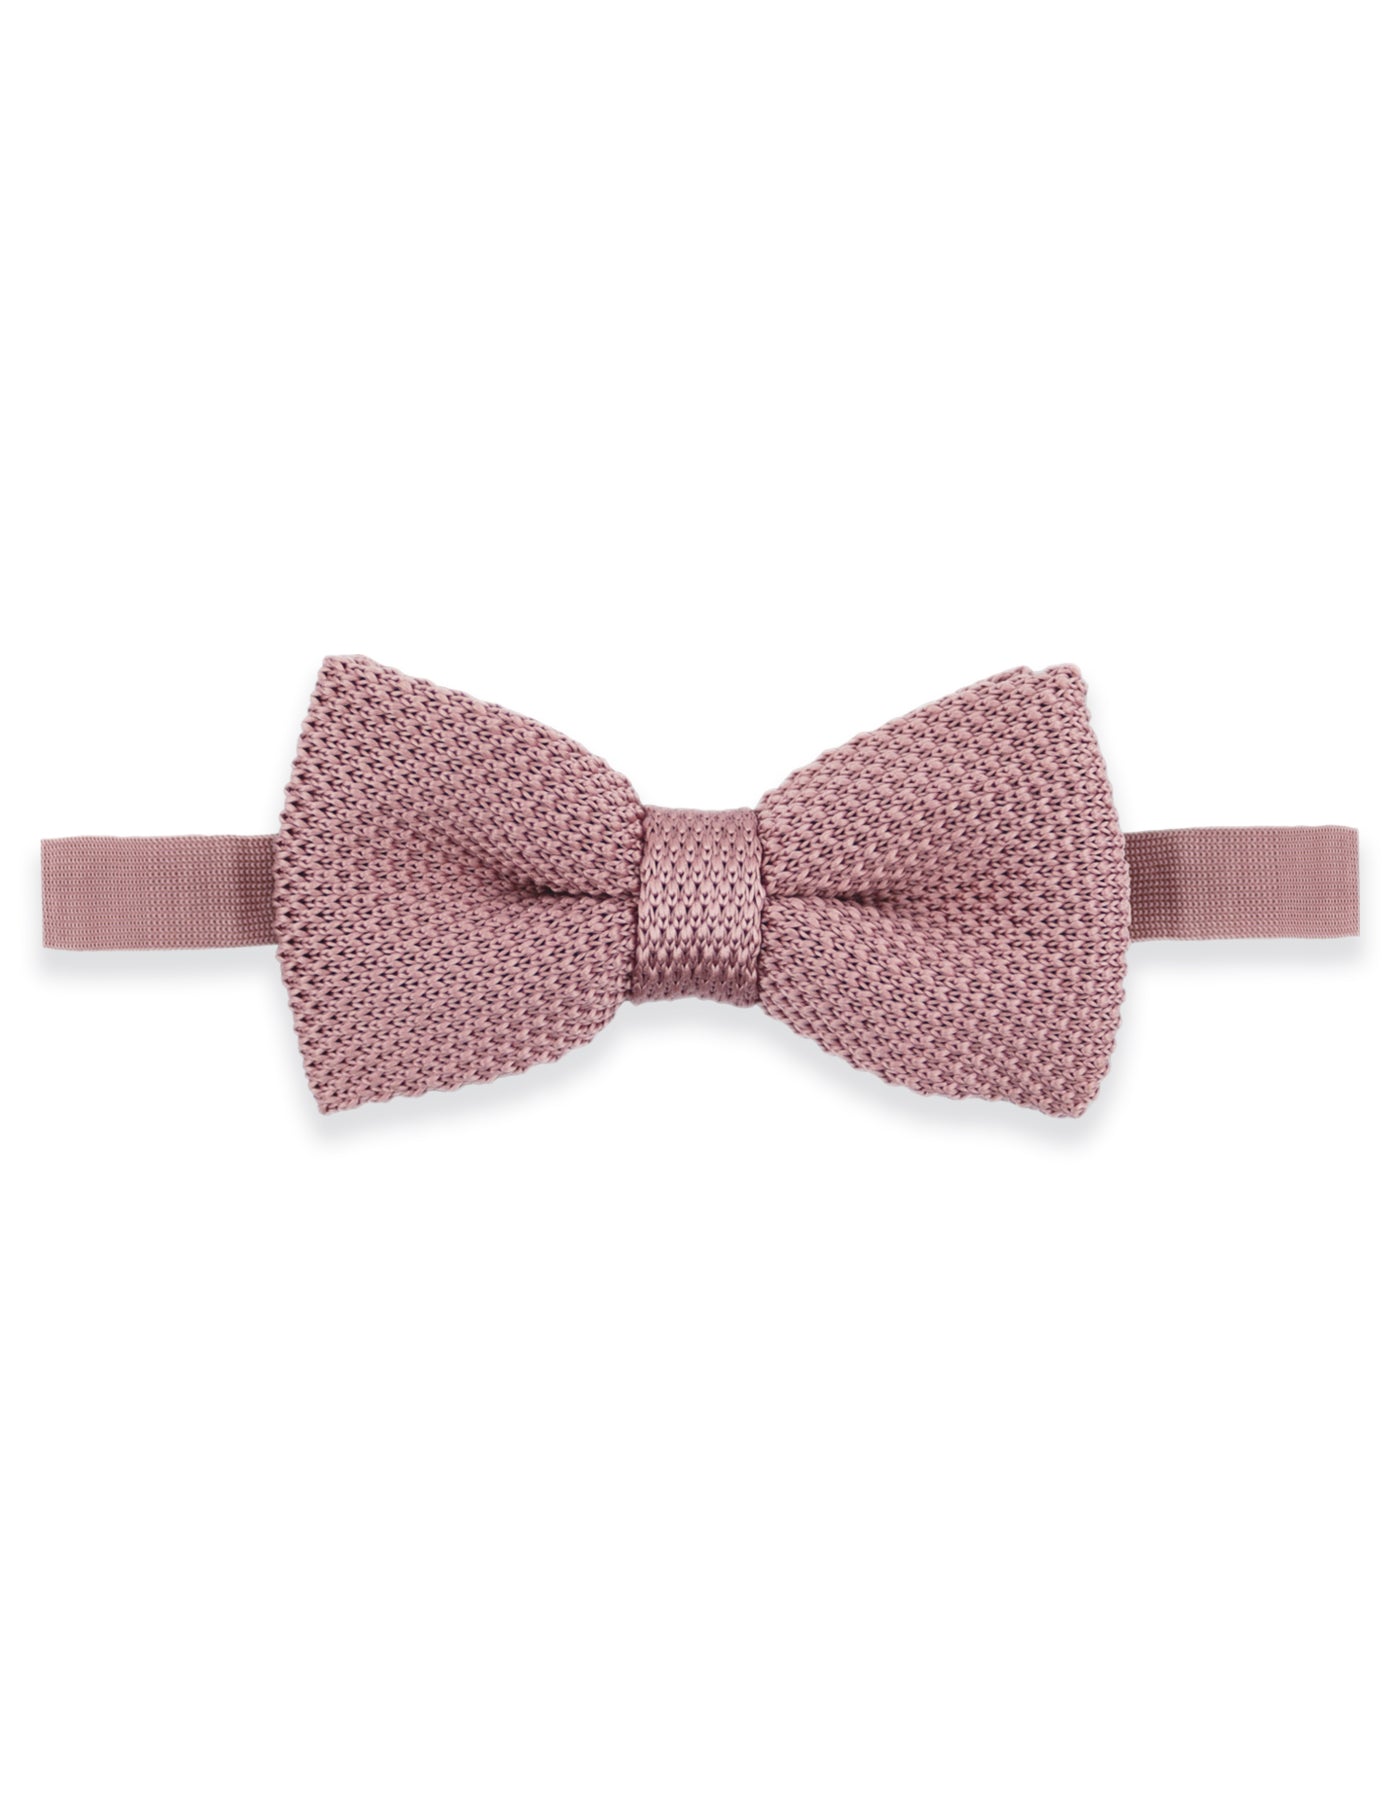 100% Polyester Diamond End Knitted Tie - Dusty Pink